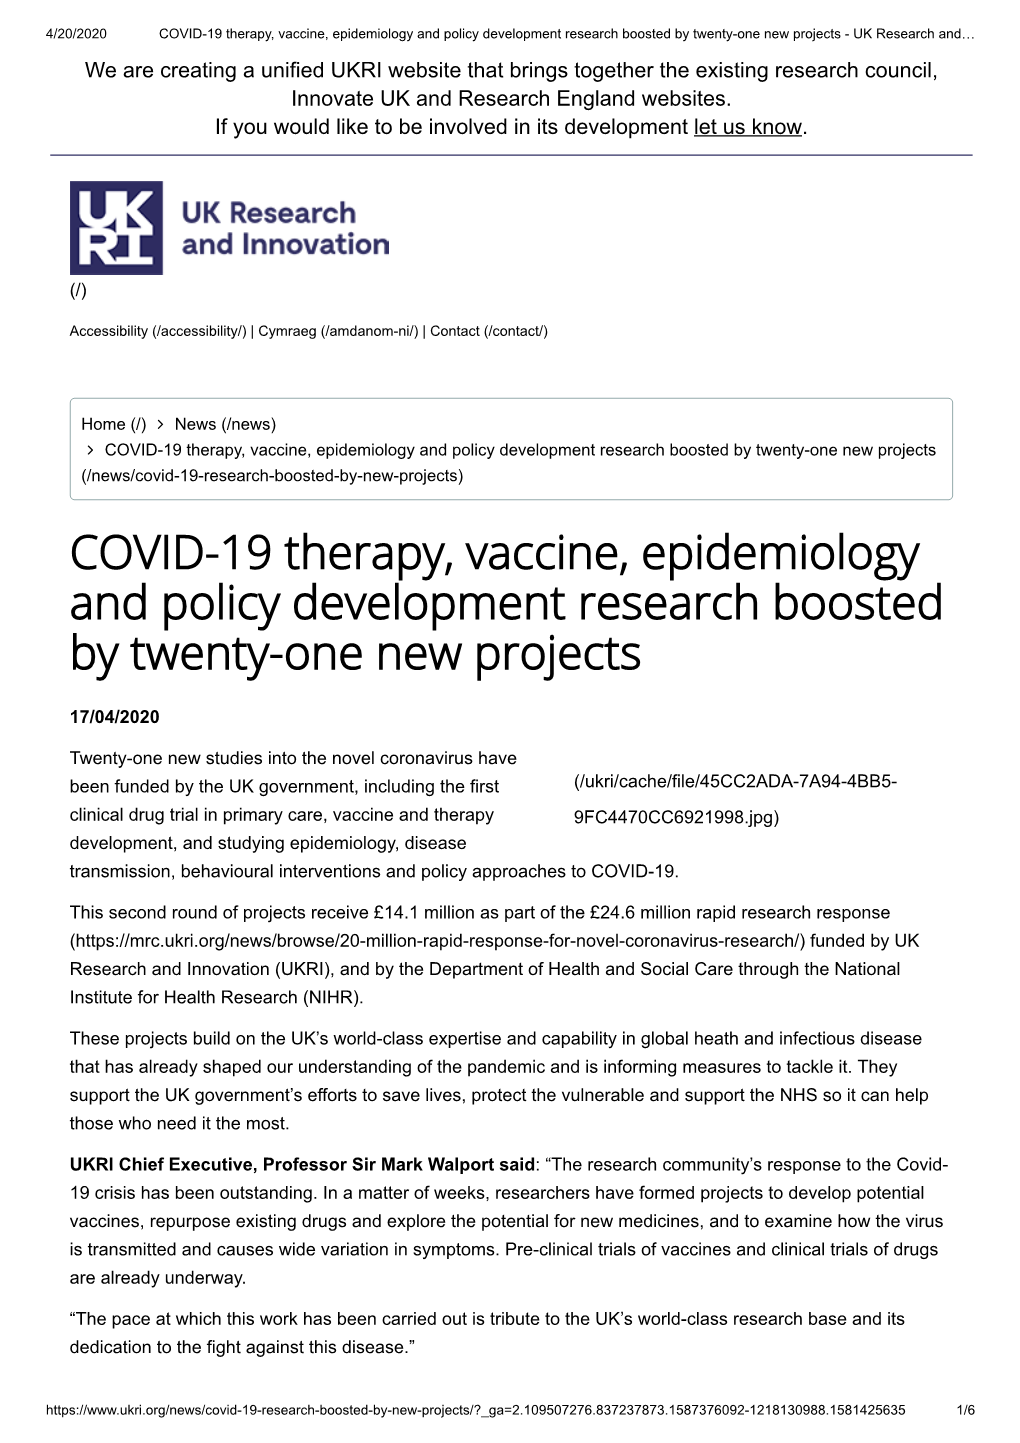 COVID-19 Therapy, Vaccine, Epidemiology and Policy